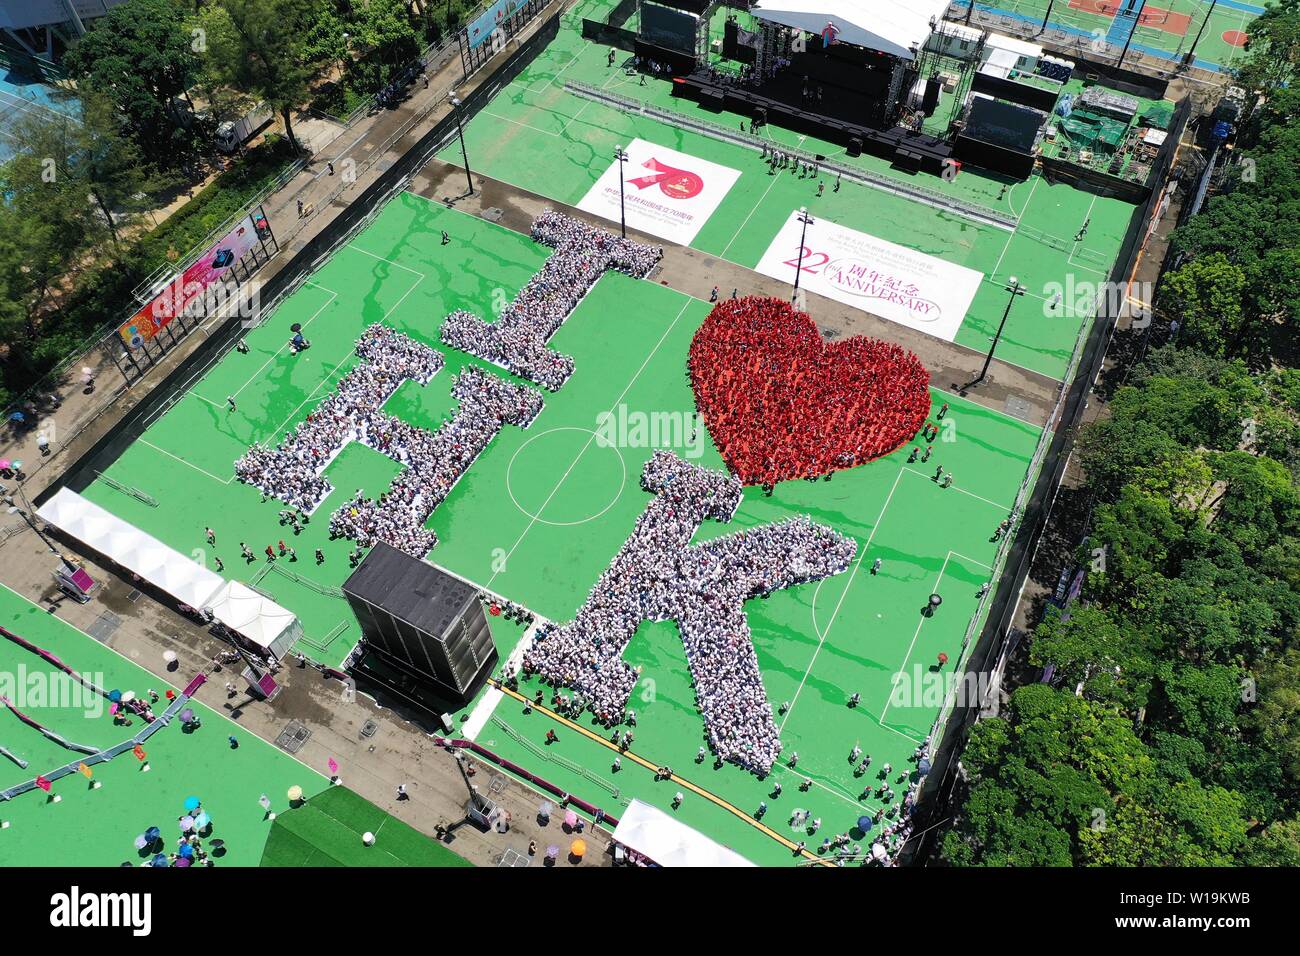 Hong Kong. 1st July, 2019. Aerial photo taken on July 1, 2019 shows a formation which spells out the words 'I LOVE HK' to celebrate the 22nd birthday of the Hong Kong Special Administrative Region (HKSAR) in south China's Hong Kong. About 5,000 people gathered at Victoria Park in Hong Kong on Monday and stood in the formation spelling out words 'I LOVE HK' to celebrate the 22nd birthday of the Hong Kong Special Administrative Region (HKSAR). Credit: Lui Siu Wai/Xinhua/Alamy Live News Stock Photo